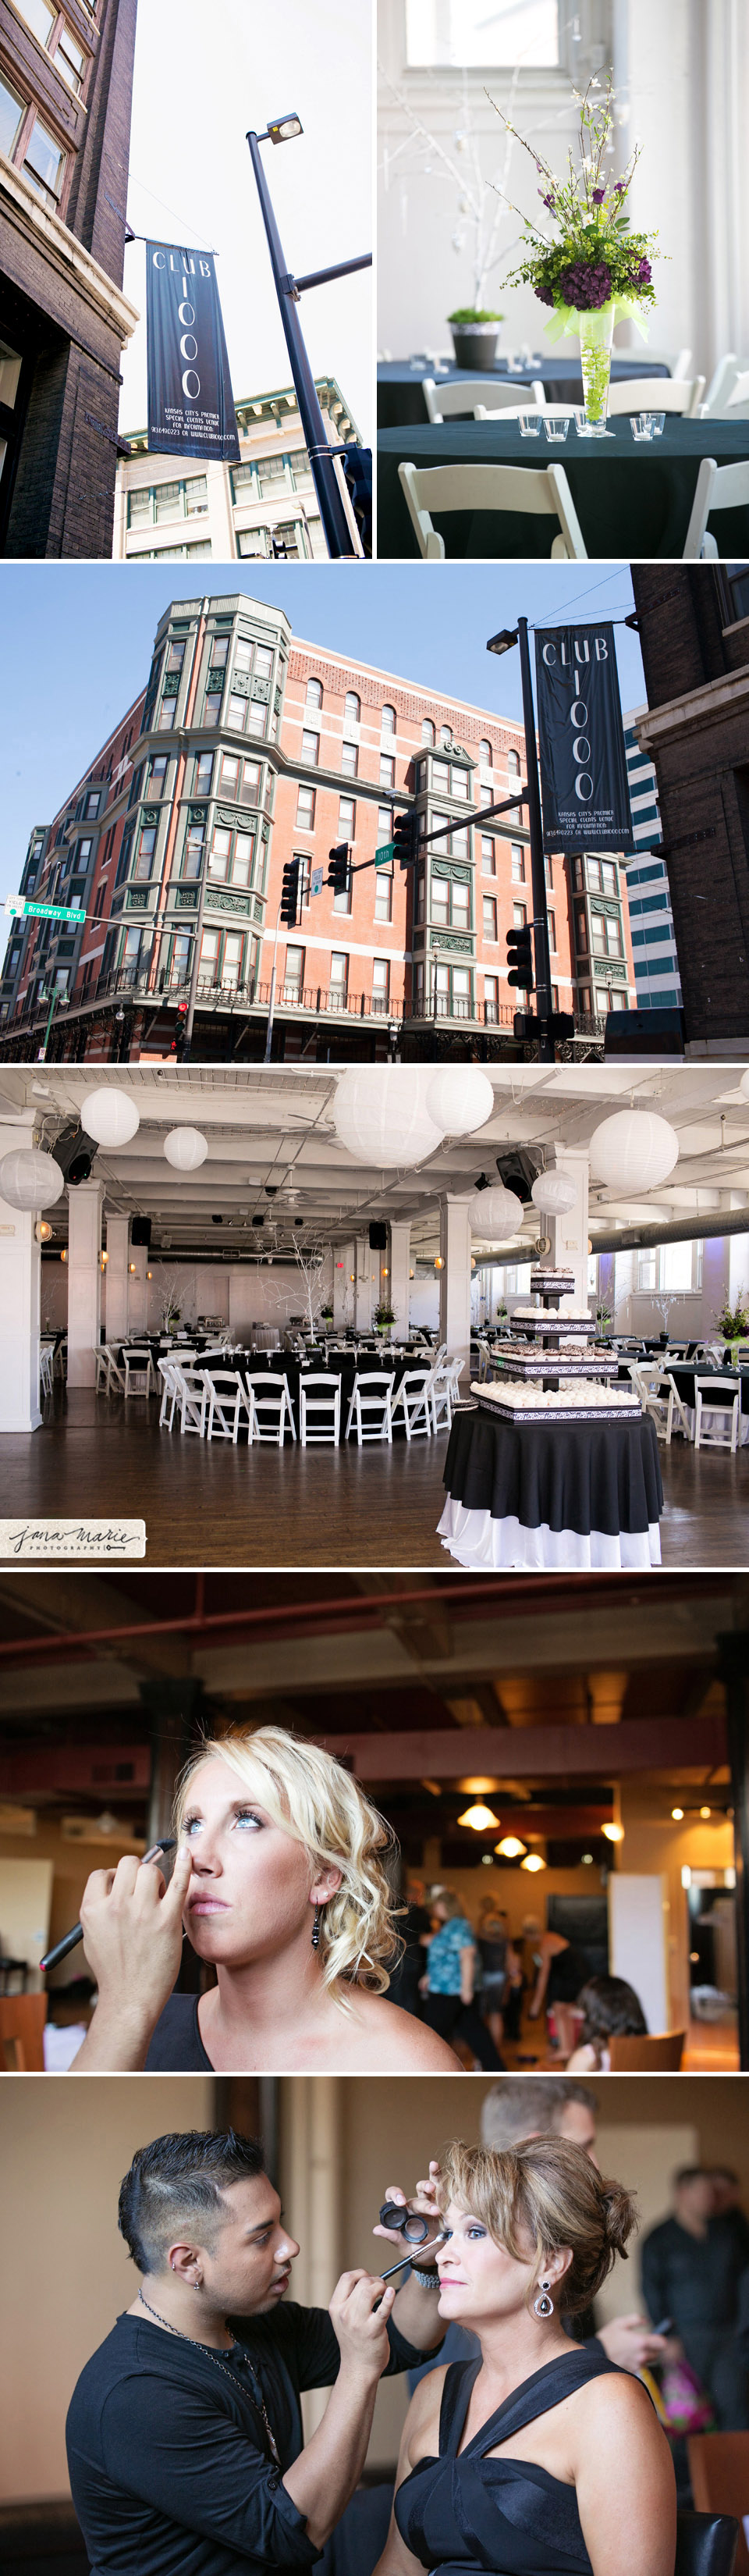 Club 1000, Cupcakes, Jana Marie Photography, KC weddings, EA Bride, Urban event spaces, black and white